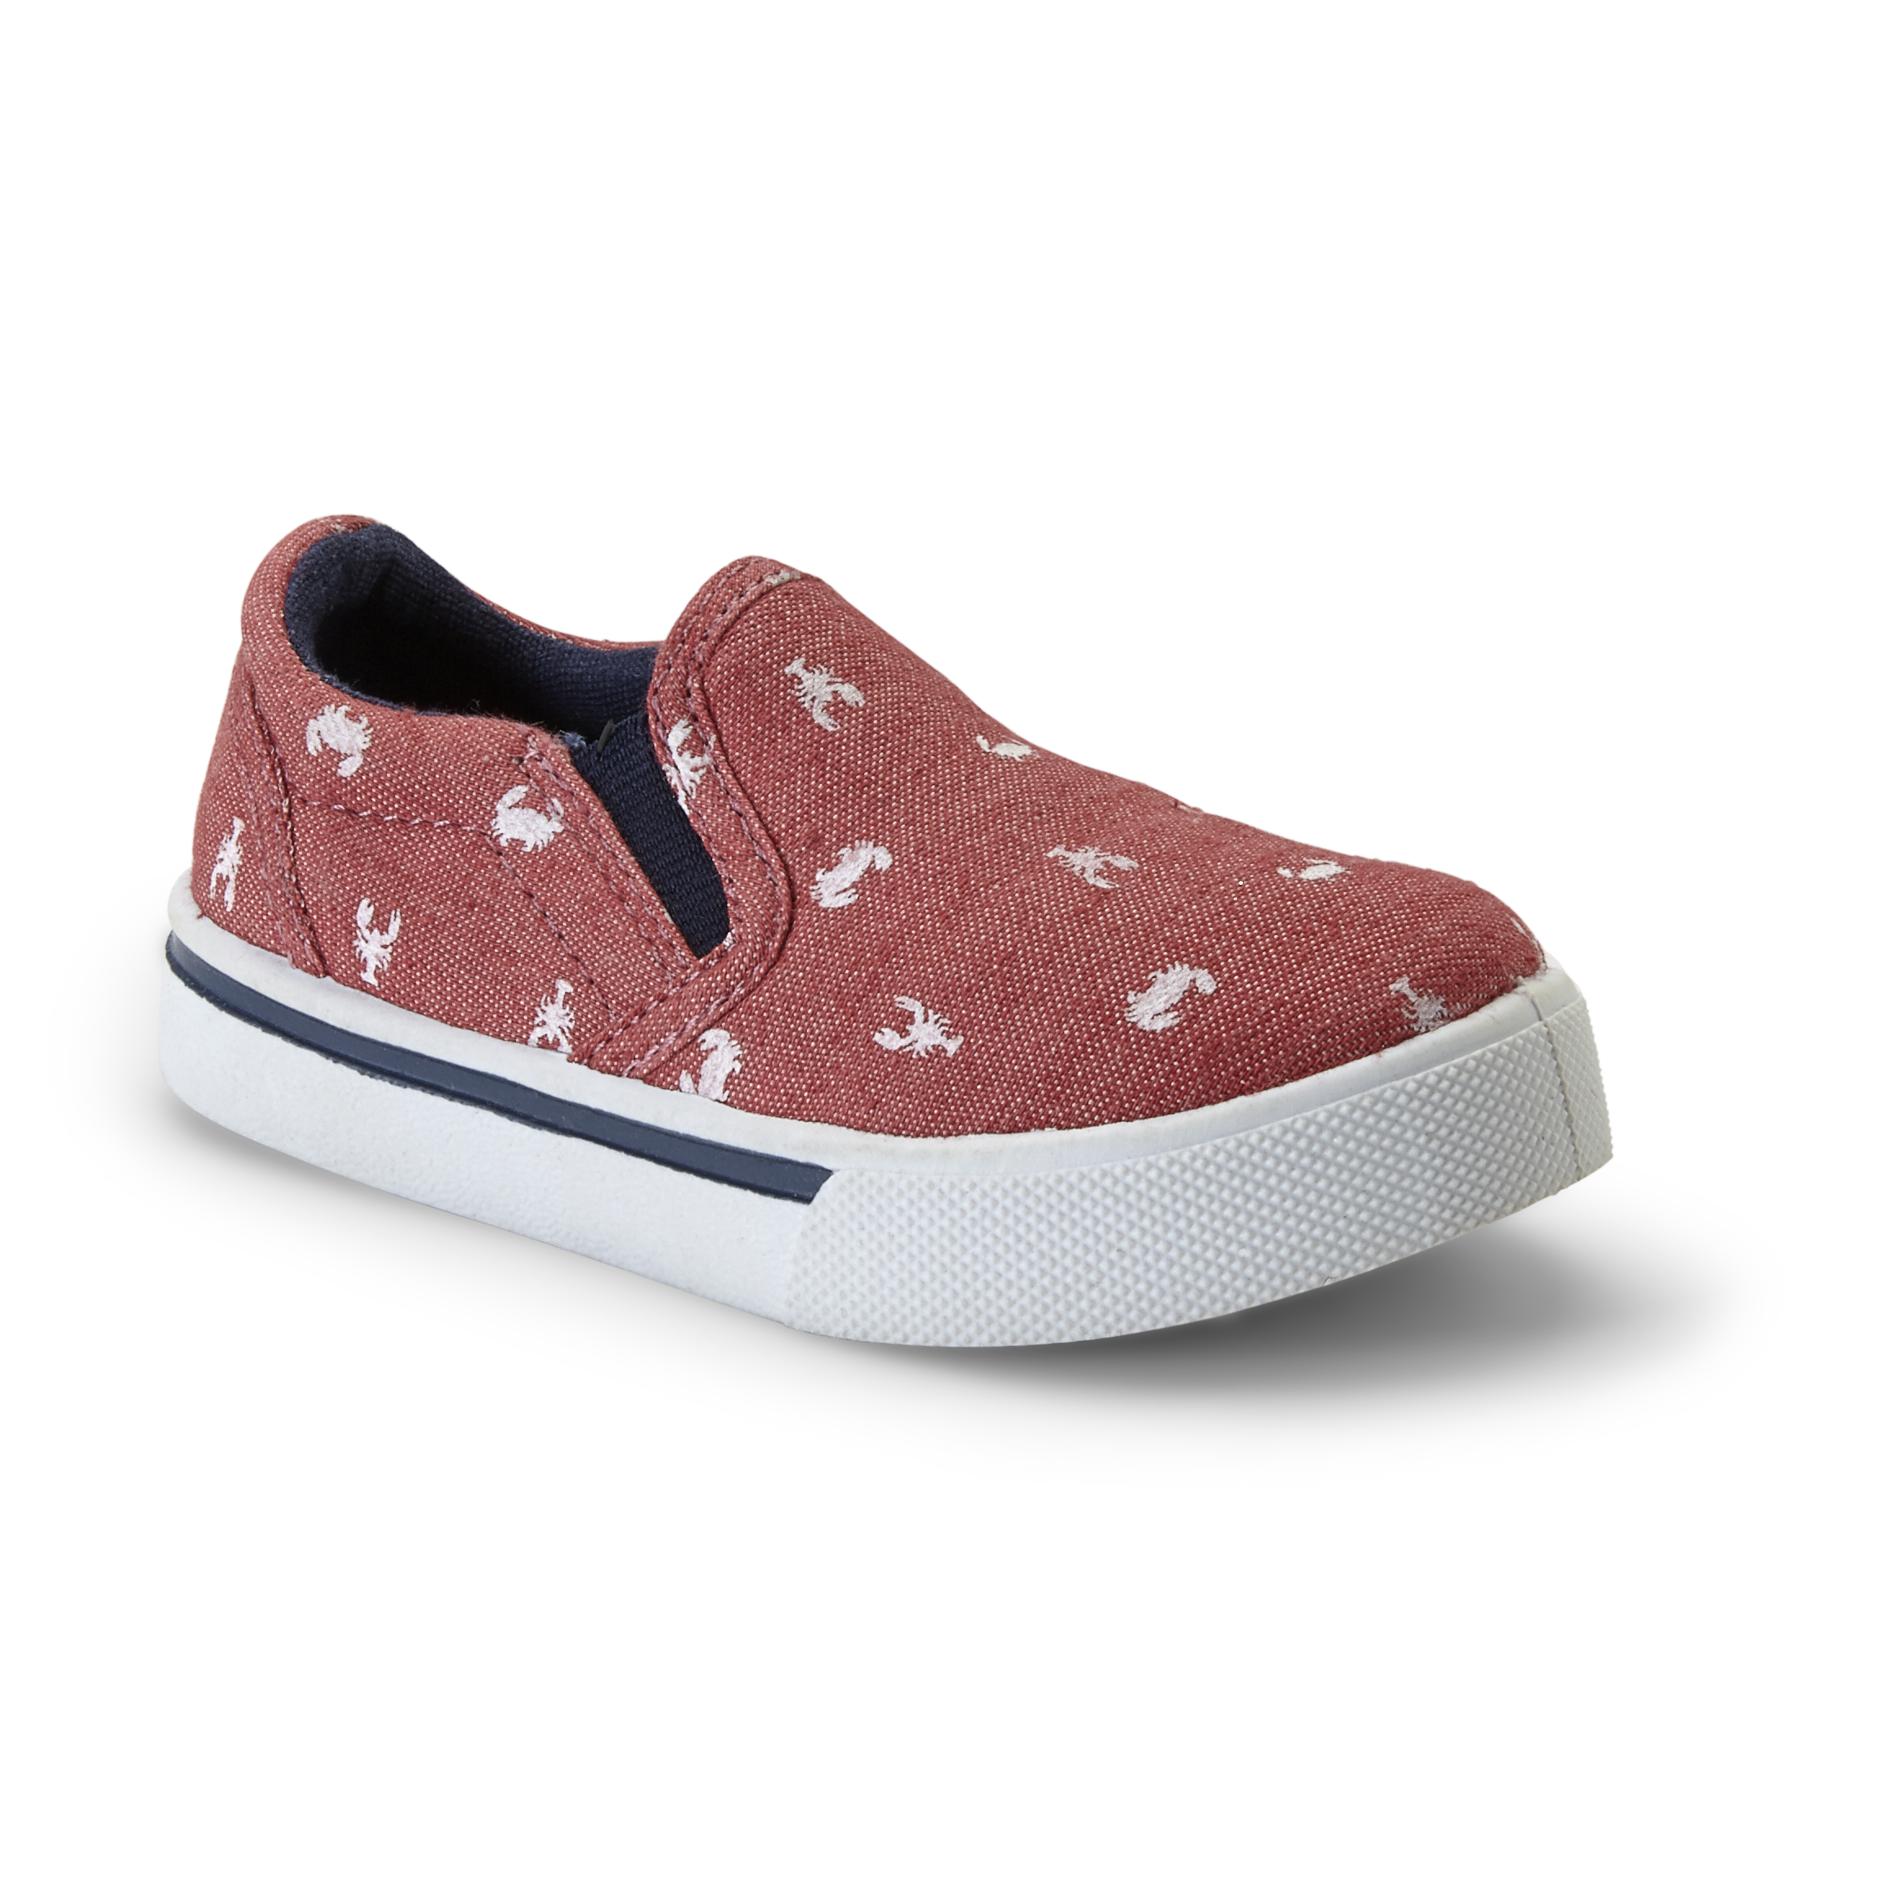 Carter's Toddler Boy's Damon Red Canvas Deck Shoe - Lobsters & Crabs